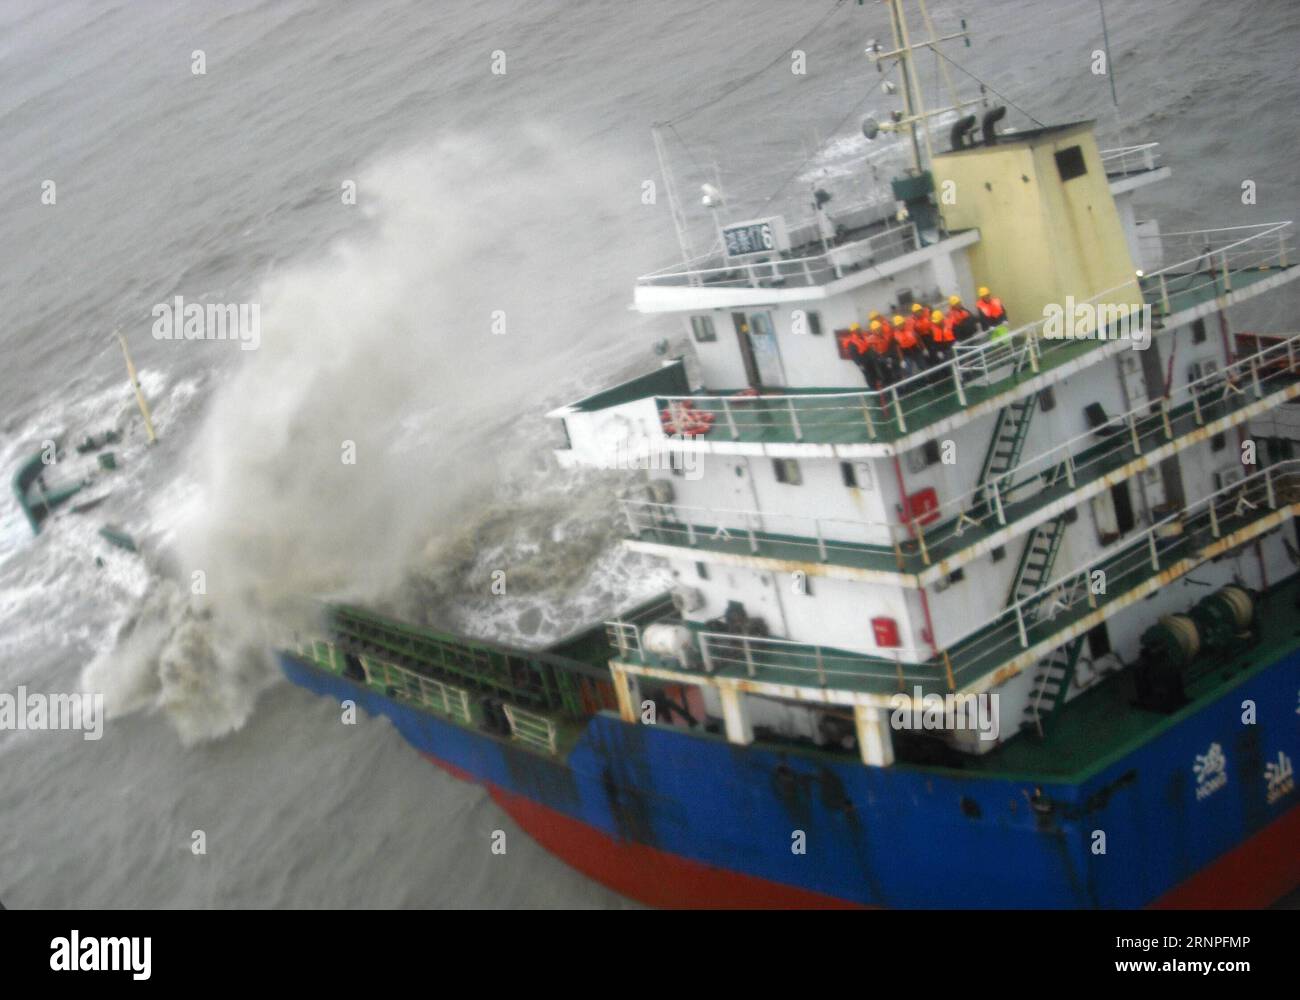 (170827) -- HONG KONG, Aug. 27, 2017 () -- A wreck accident is seen at sea near Hong Kong, south China, Aug. 27, 2017. Eleven crew members of a sunken cargo ship were rescued in Hong Kong waters during severe tropical storm Pakhar s hit on Sunday, said the Government Flying Service (GFS) of China s Hong Kong Special Administrative Region (HKSAR). () (zhs) CHINA-HONG KONG-TYPHOON-CARGO SHIP-RESCUE (CN) Xinhua PUBLICATIONxNOTxINxCHN   Hong Kong Aug 27 2017 a Wreck accident IS Lakes AT Sea Near Hong Kong South China Aug 27 2017 Eleven Crew Members of a Sunken Cargo Ship Were Rescued in Hong Kong Stock Photo